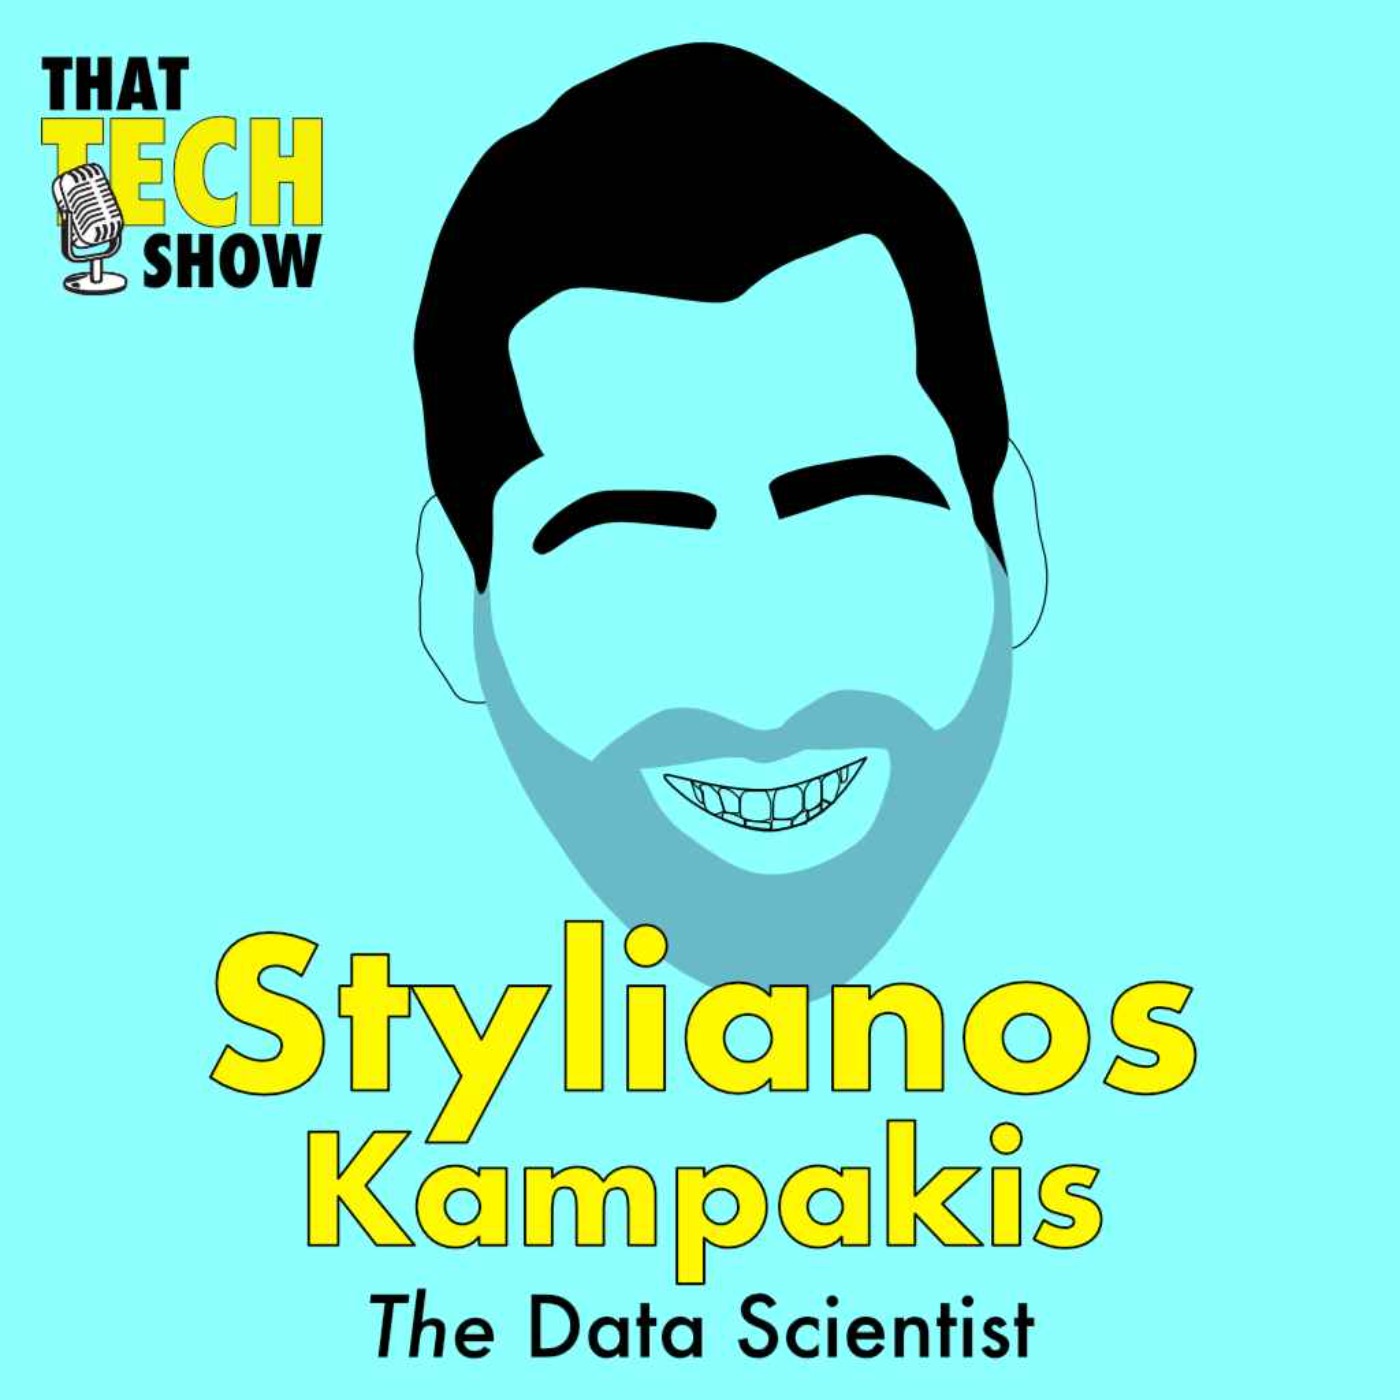 Episode 26 - The Data Scientist with Stylianos Kampakis